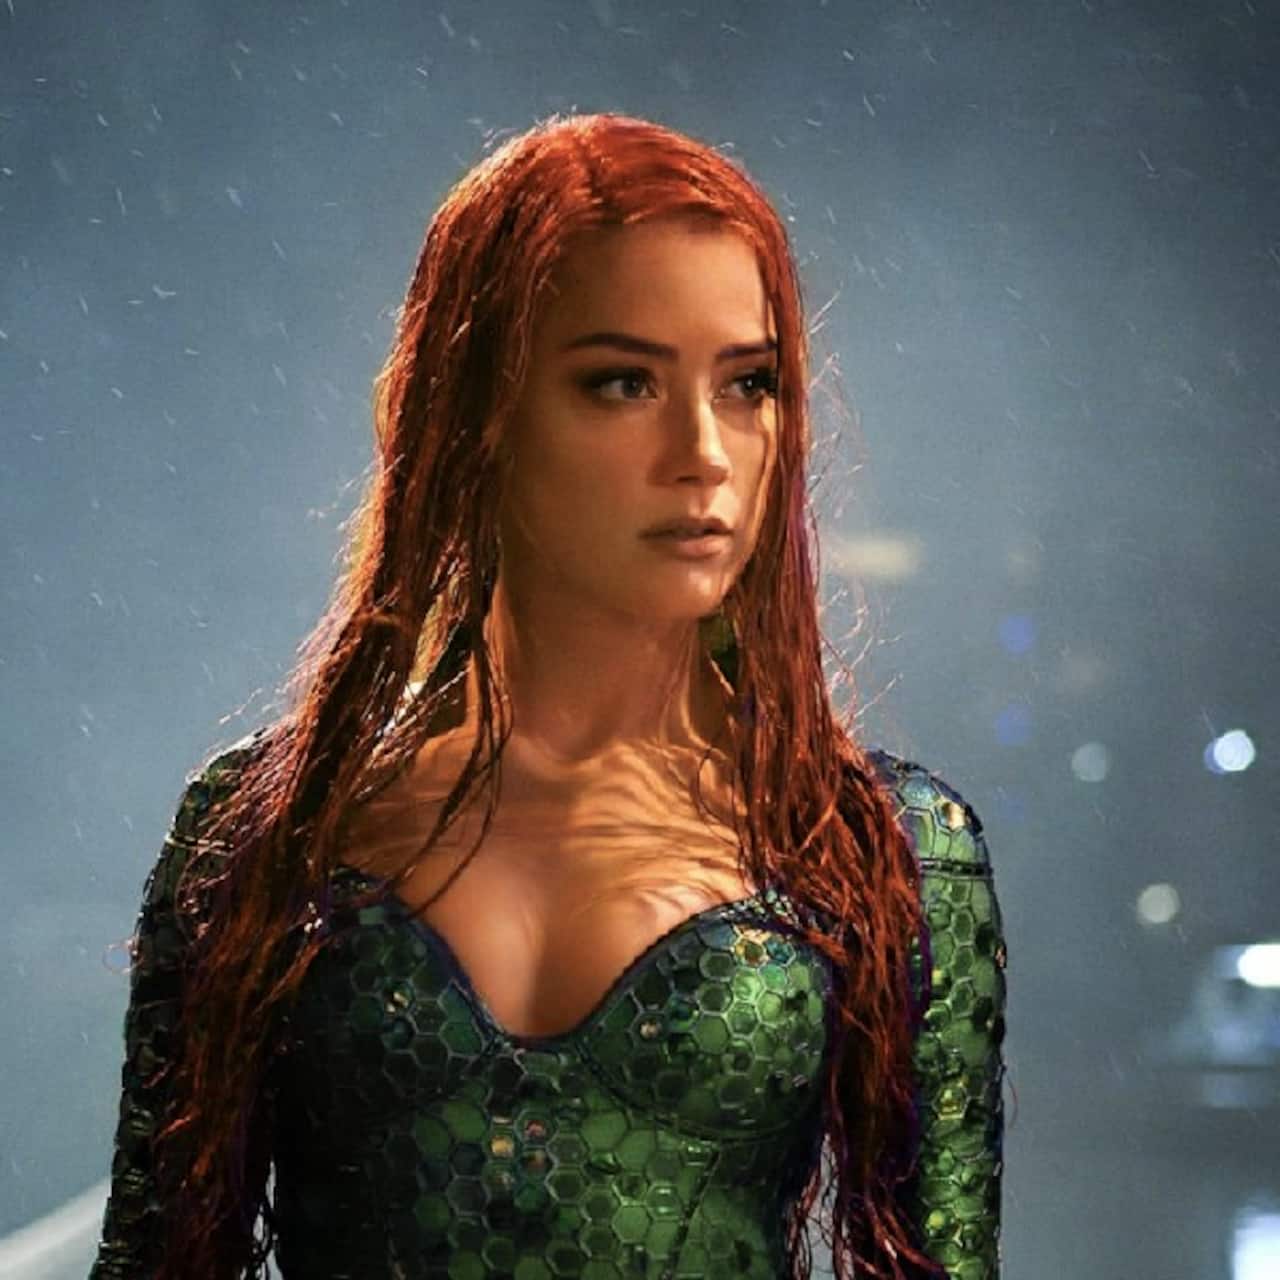 Petition to remove Amber Heard from Aquaman 2